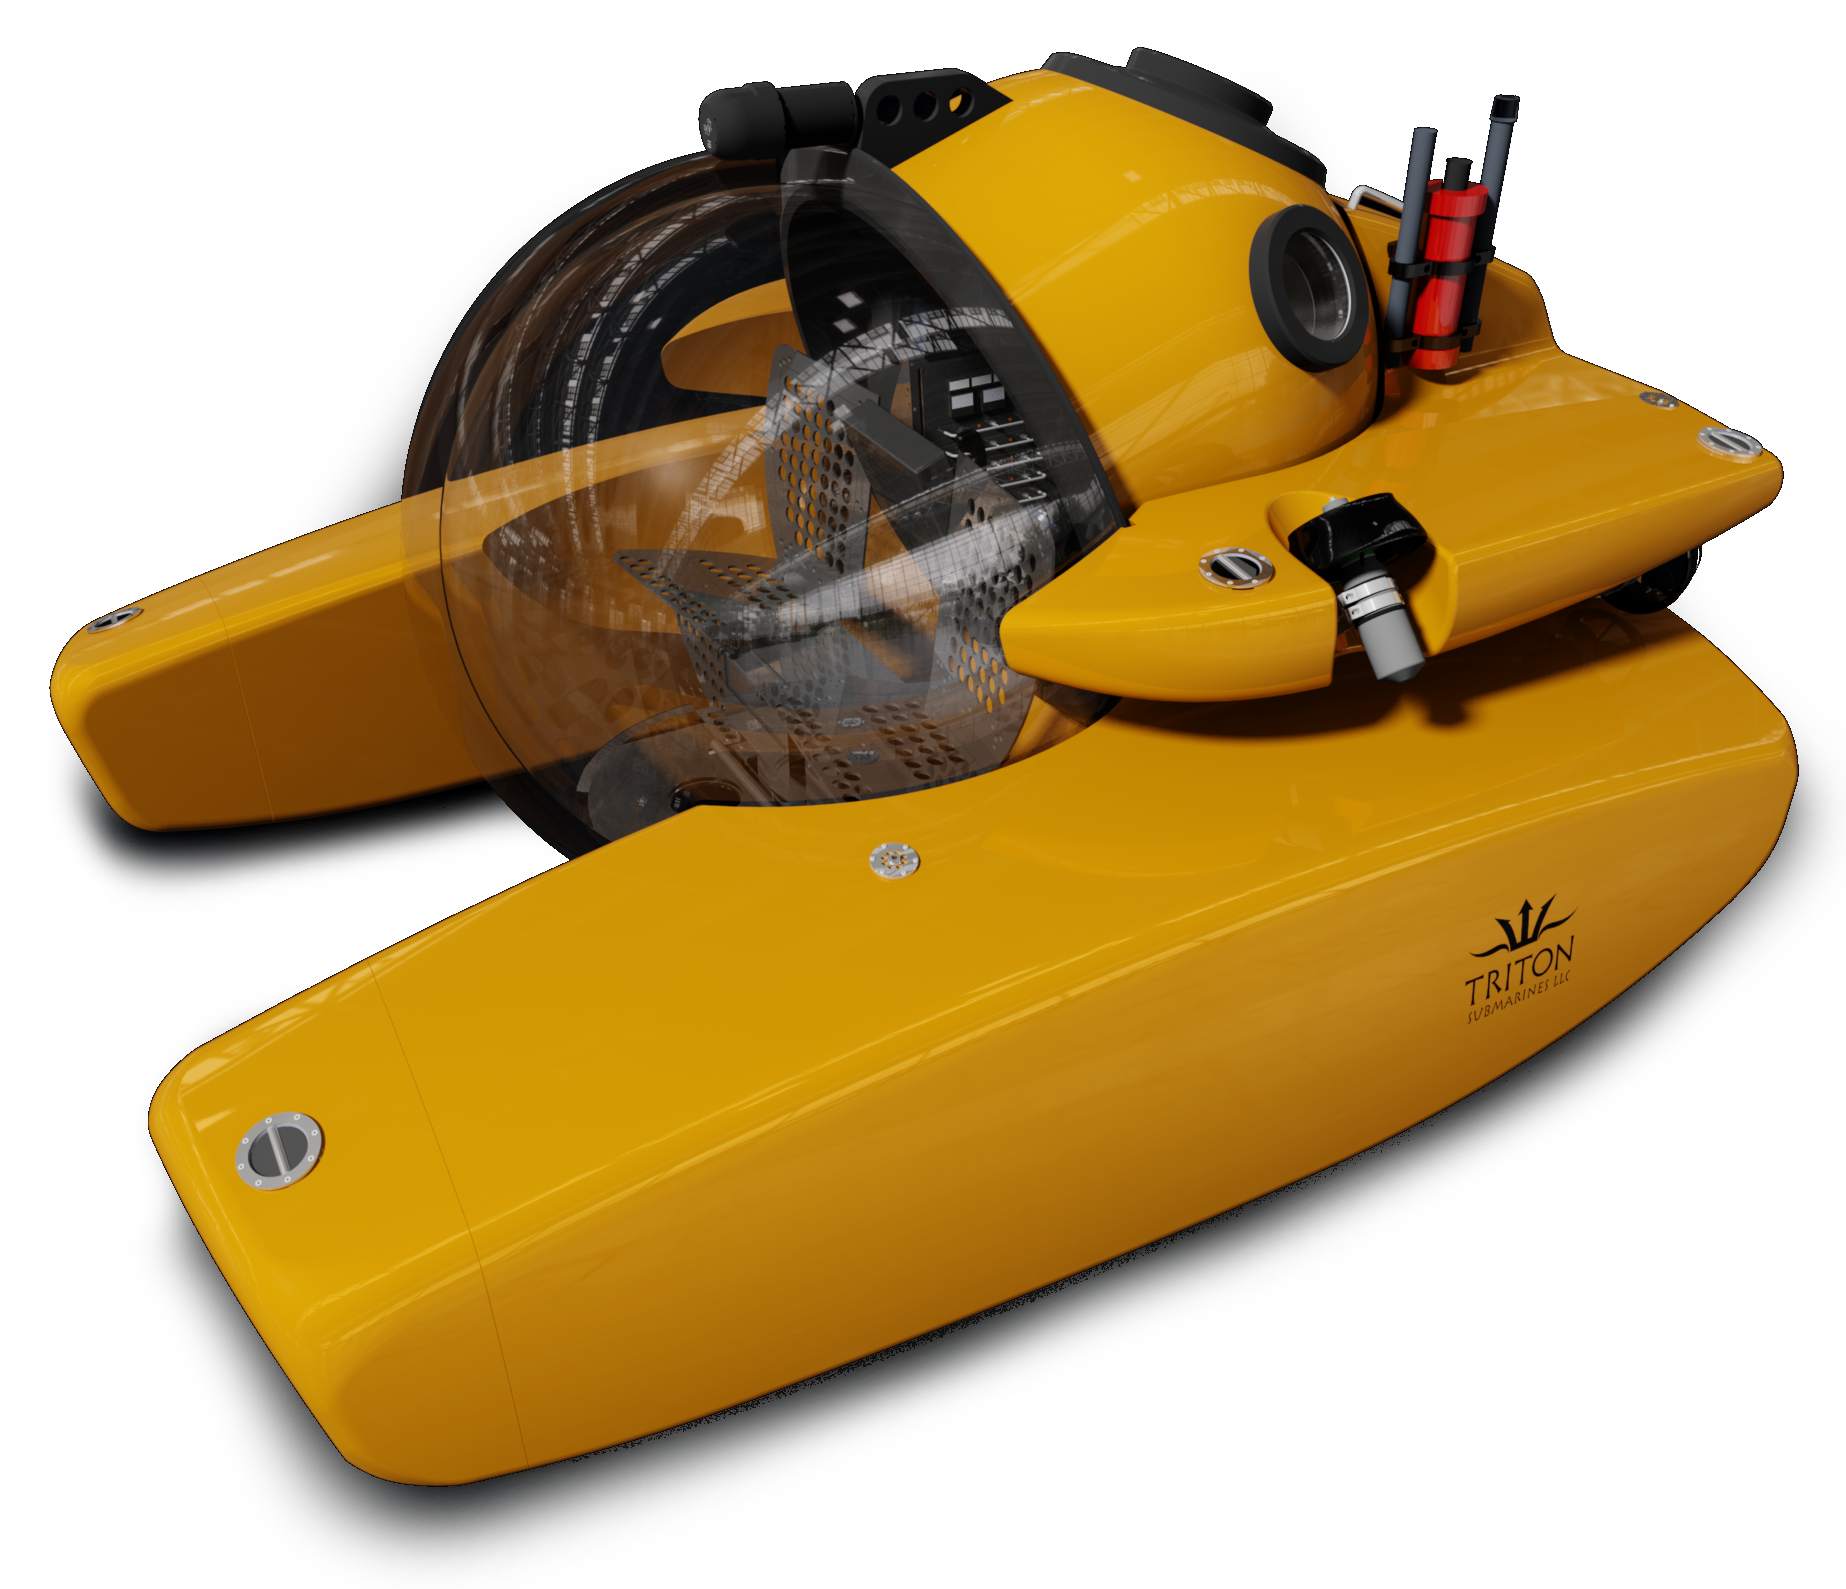 New Triton 10003 LP submersible — Yacht Charter